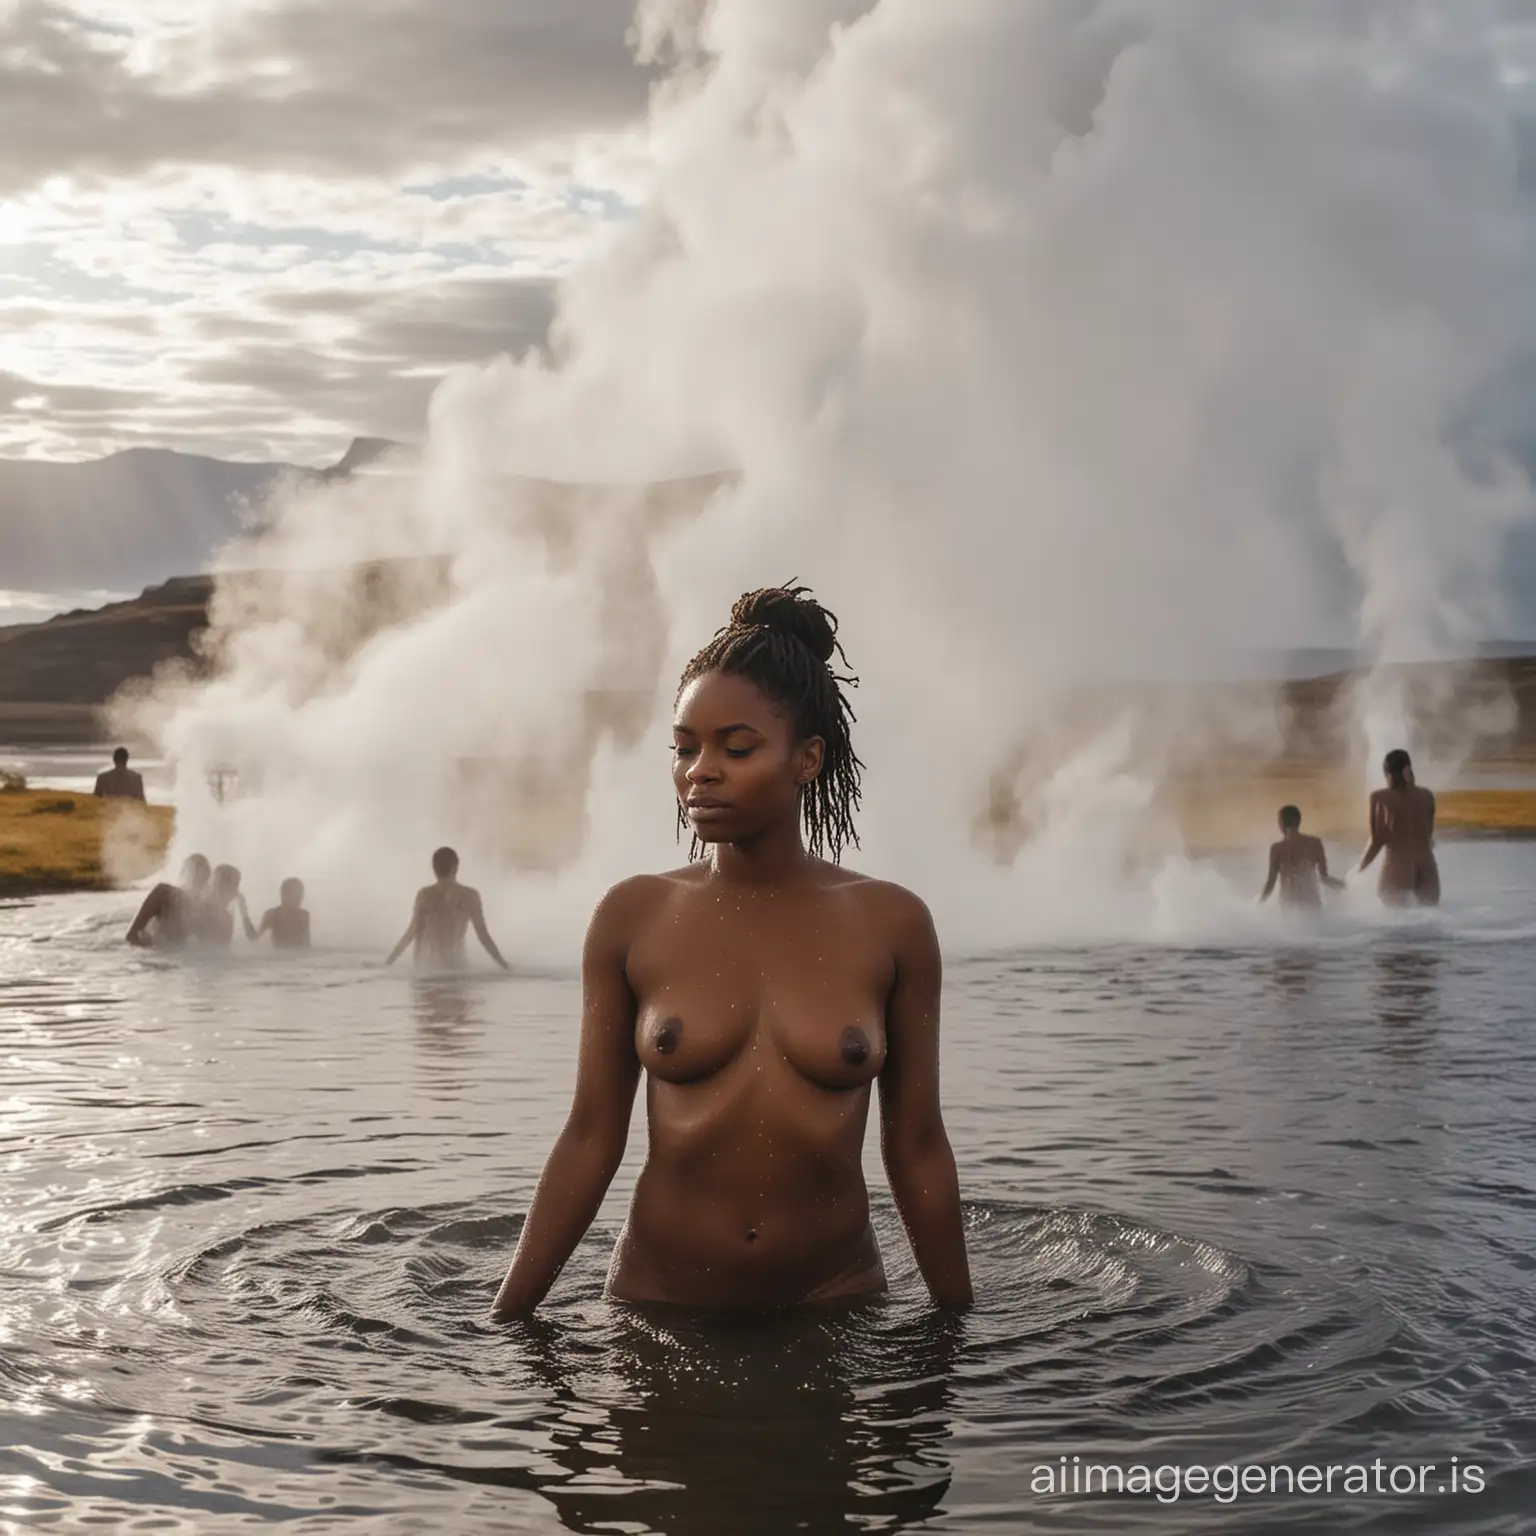 African women bathing naked in a hot water lake in Iceland, hot water vapor